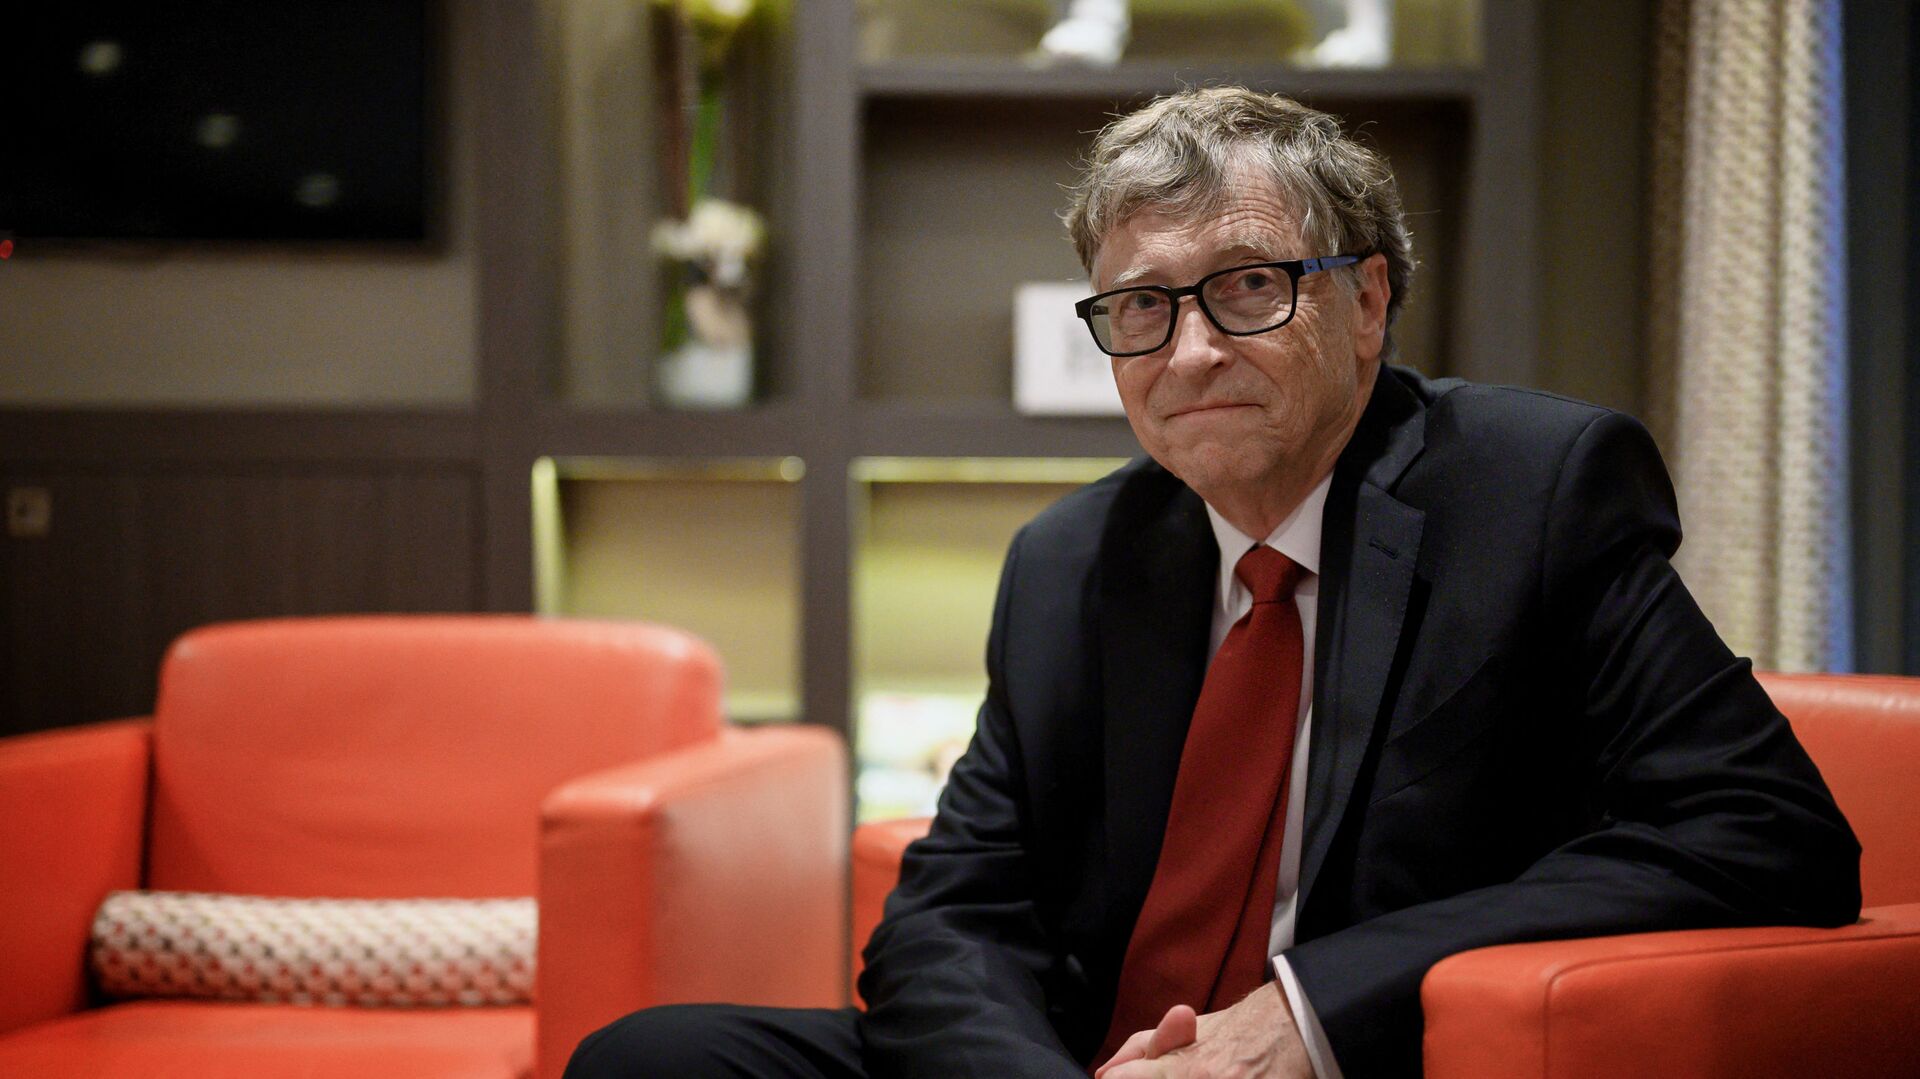 US Microsoft founder, Co-Chairman of the Bill & Melinda Gates Foundation, Bill Gates, poses for a picture on October 9, 2019, in Lyon, central eastern France, during the funding conference of Global Fund to Fight AIDS, Tuberculosis and Malaria.  - Sputnik International, 1920, 30.08.2021